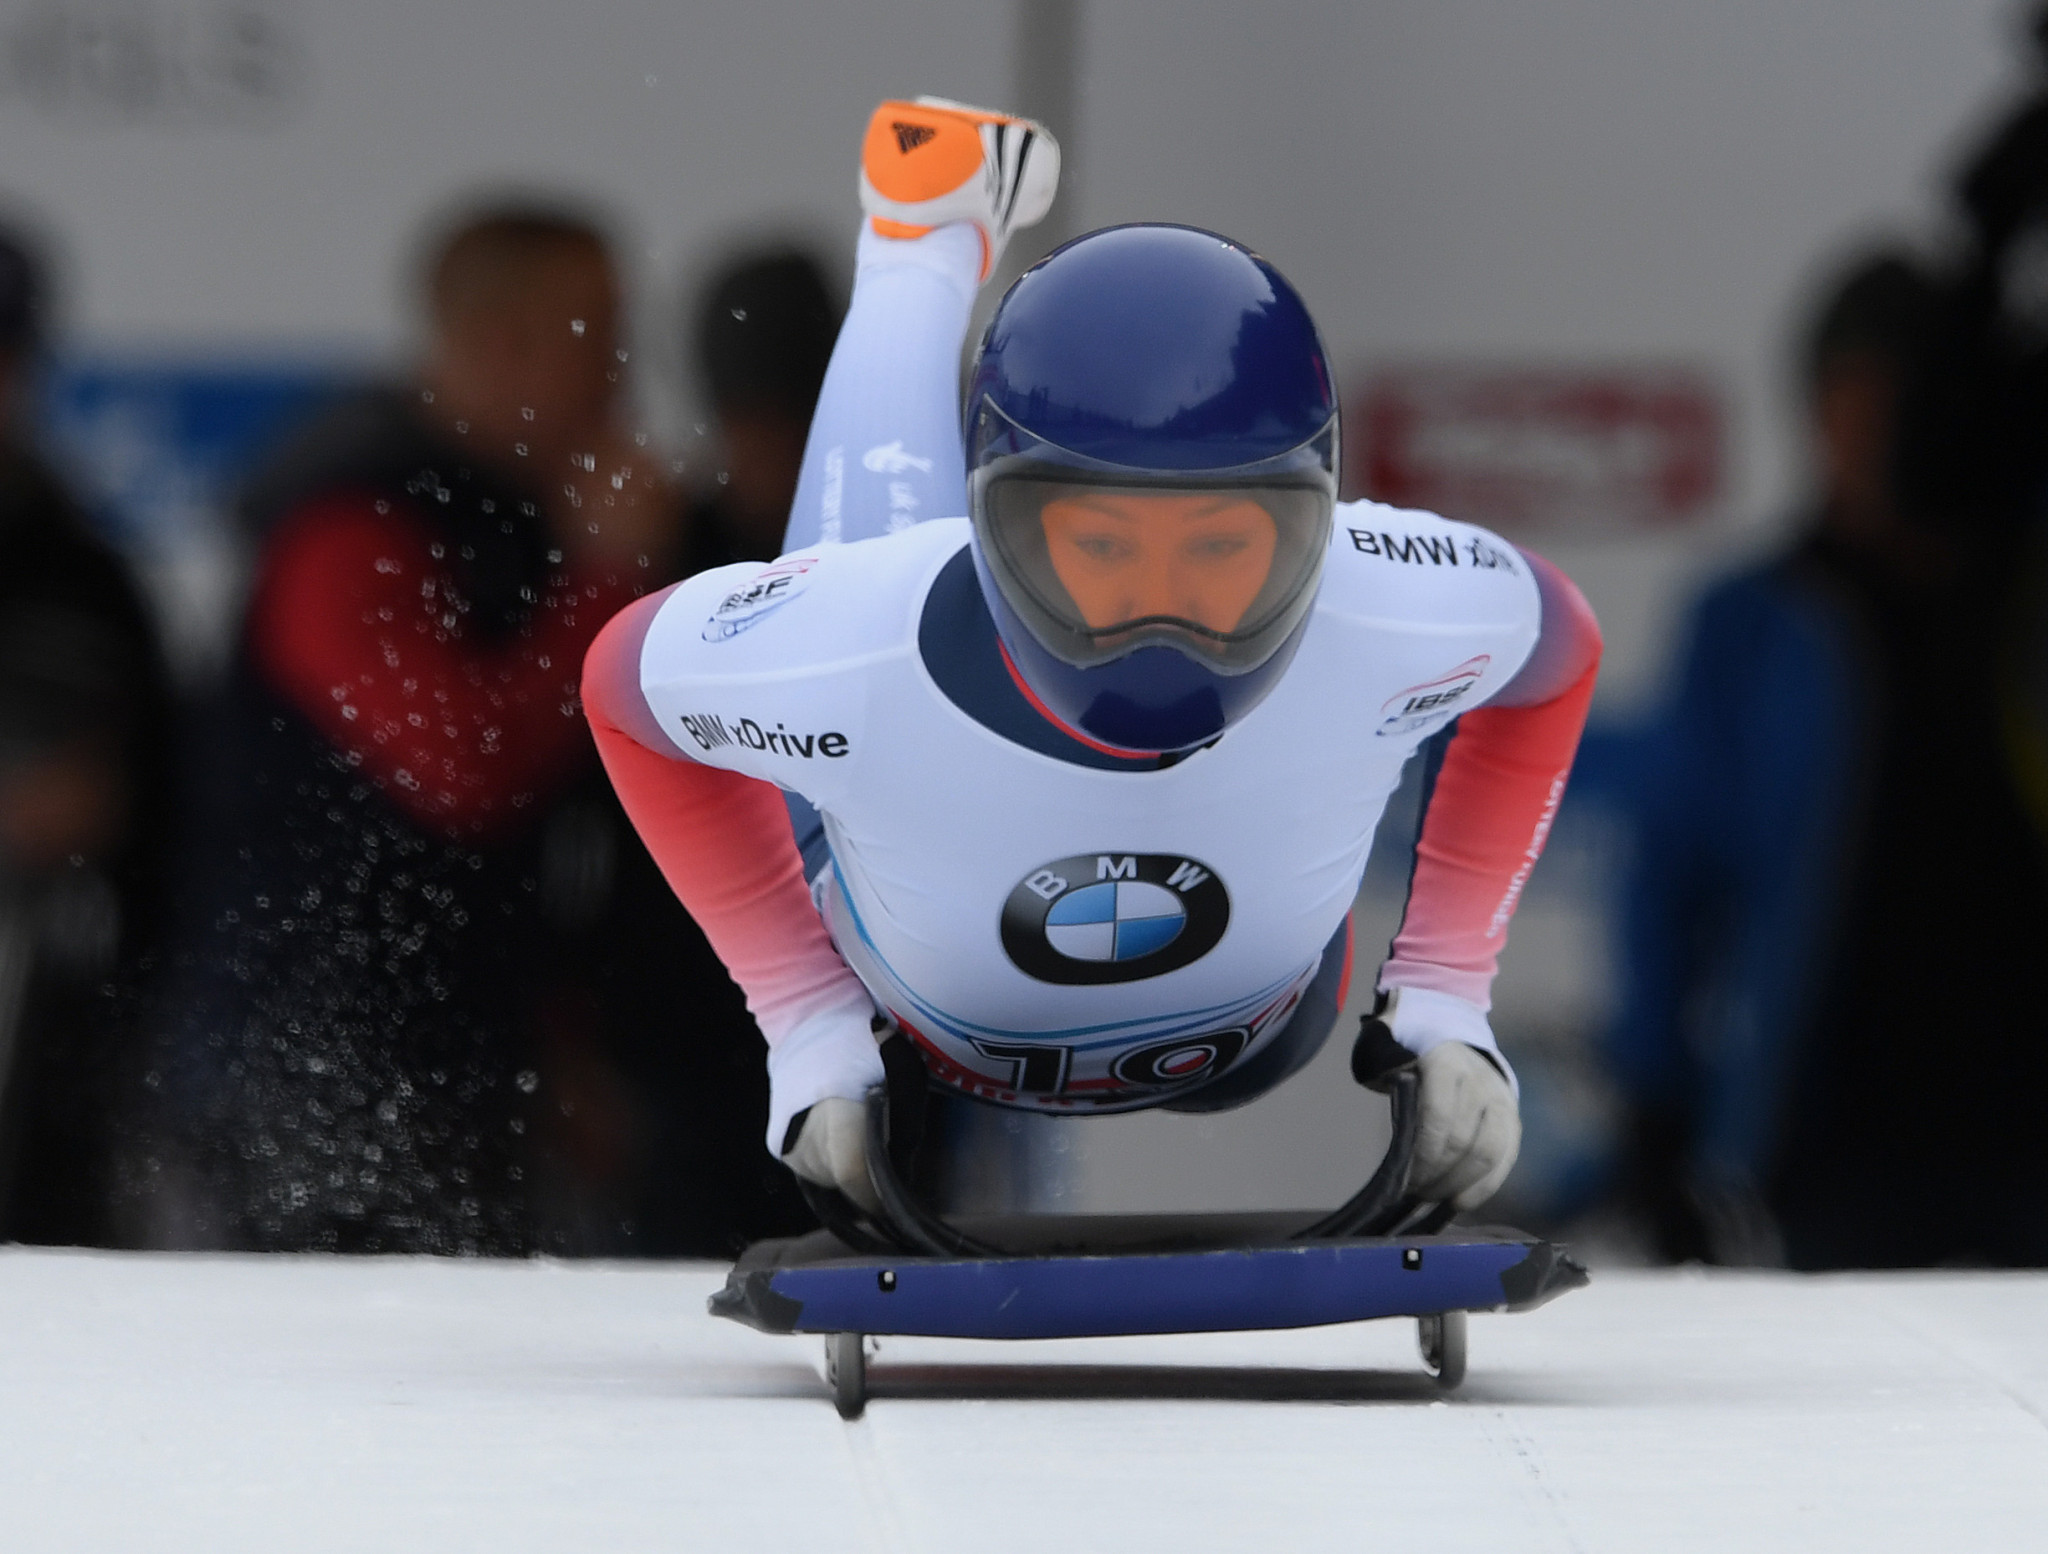 Donna Creighton, who switched from skeleton to bobsleigh, is also trying to raise funds ©Getty Images